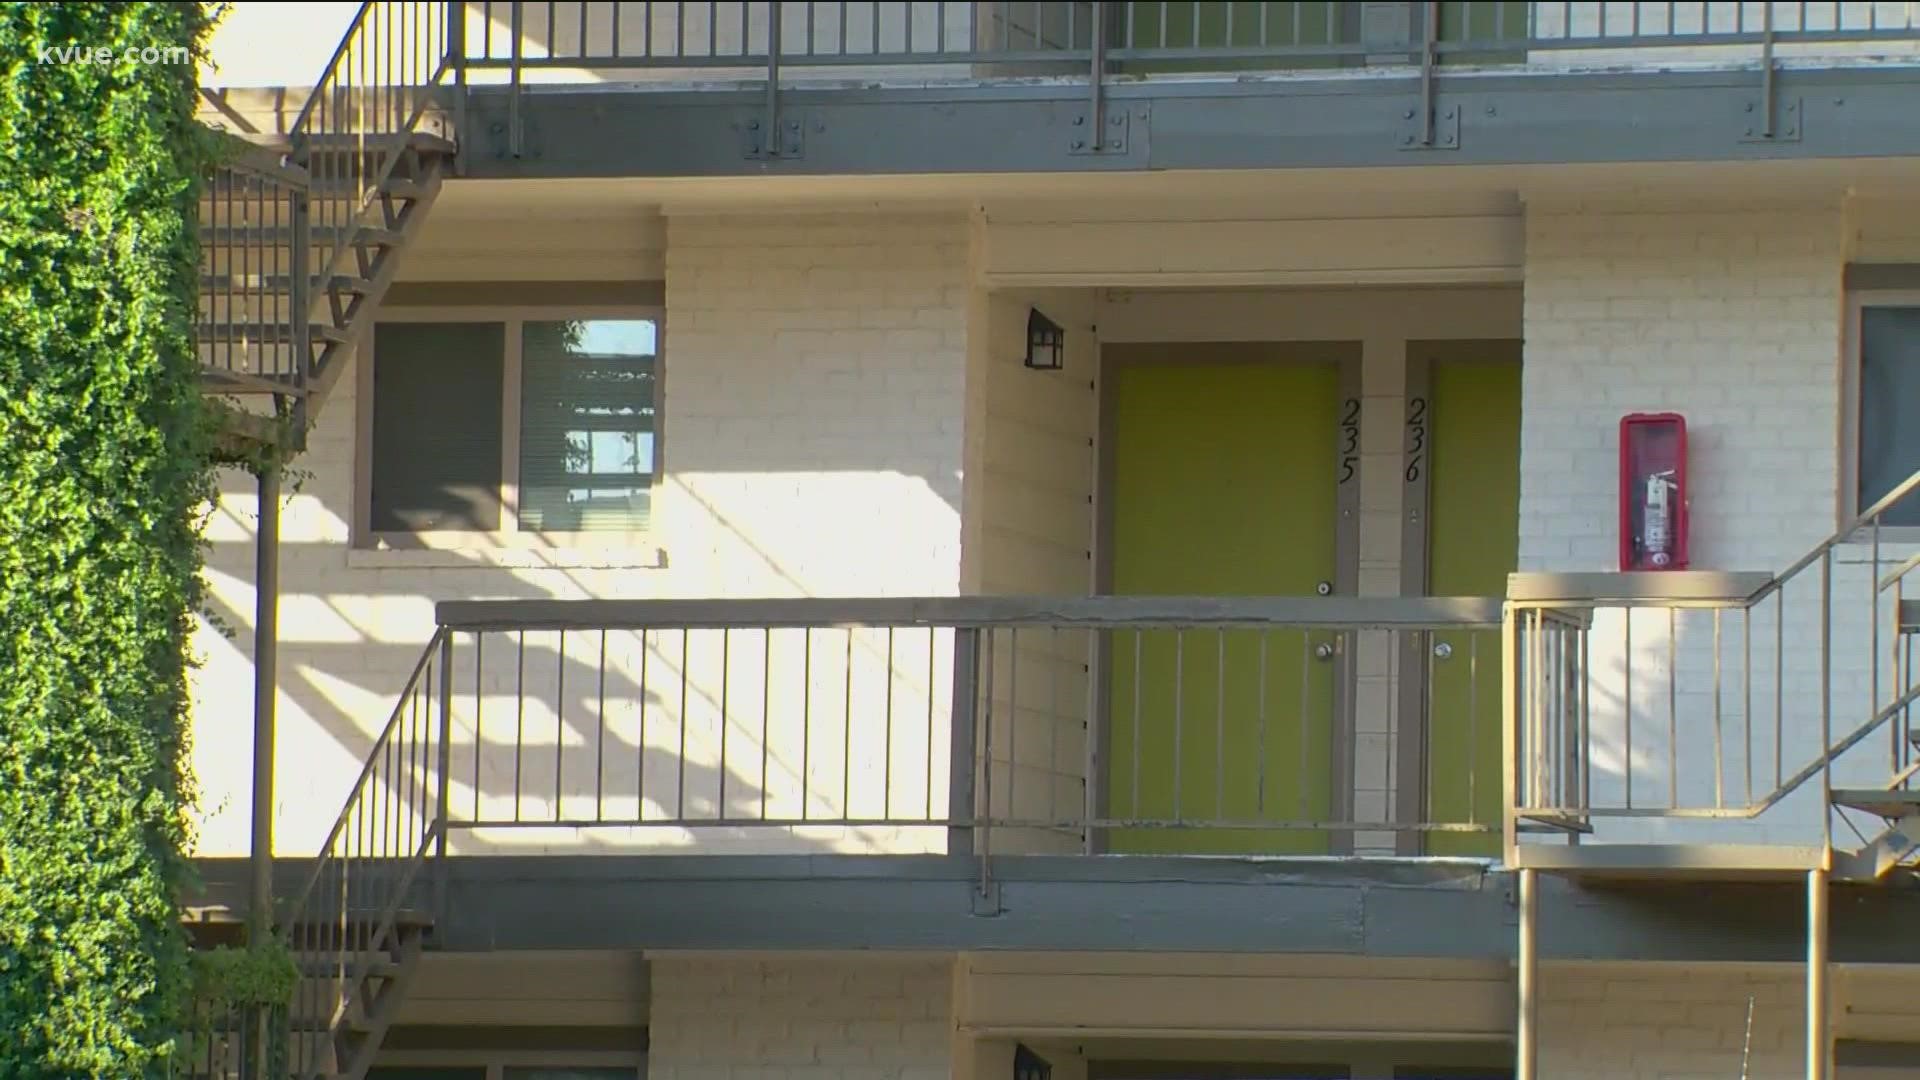 Travis County using alternate funding to help people with rental